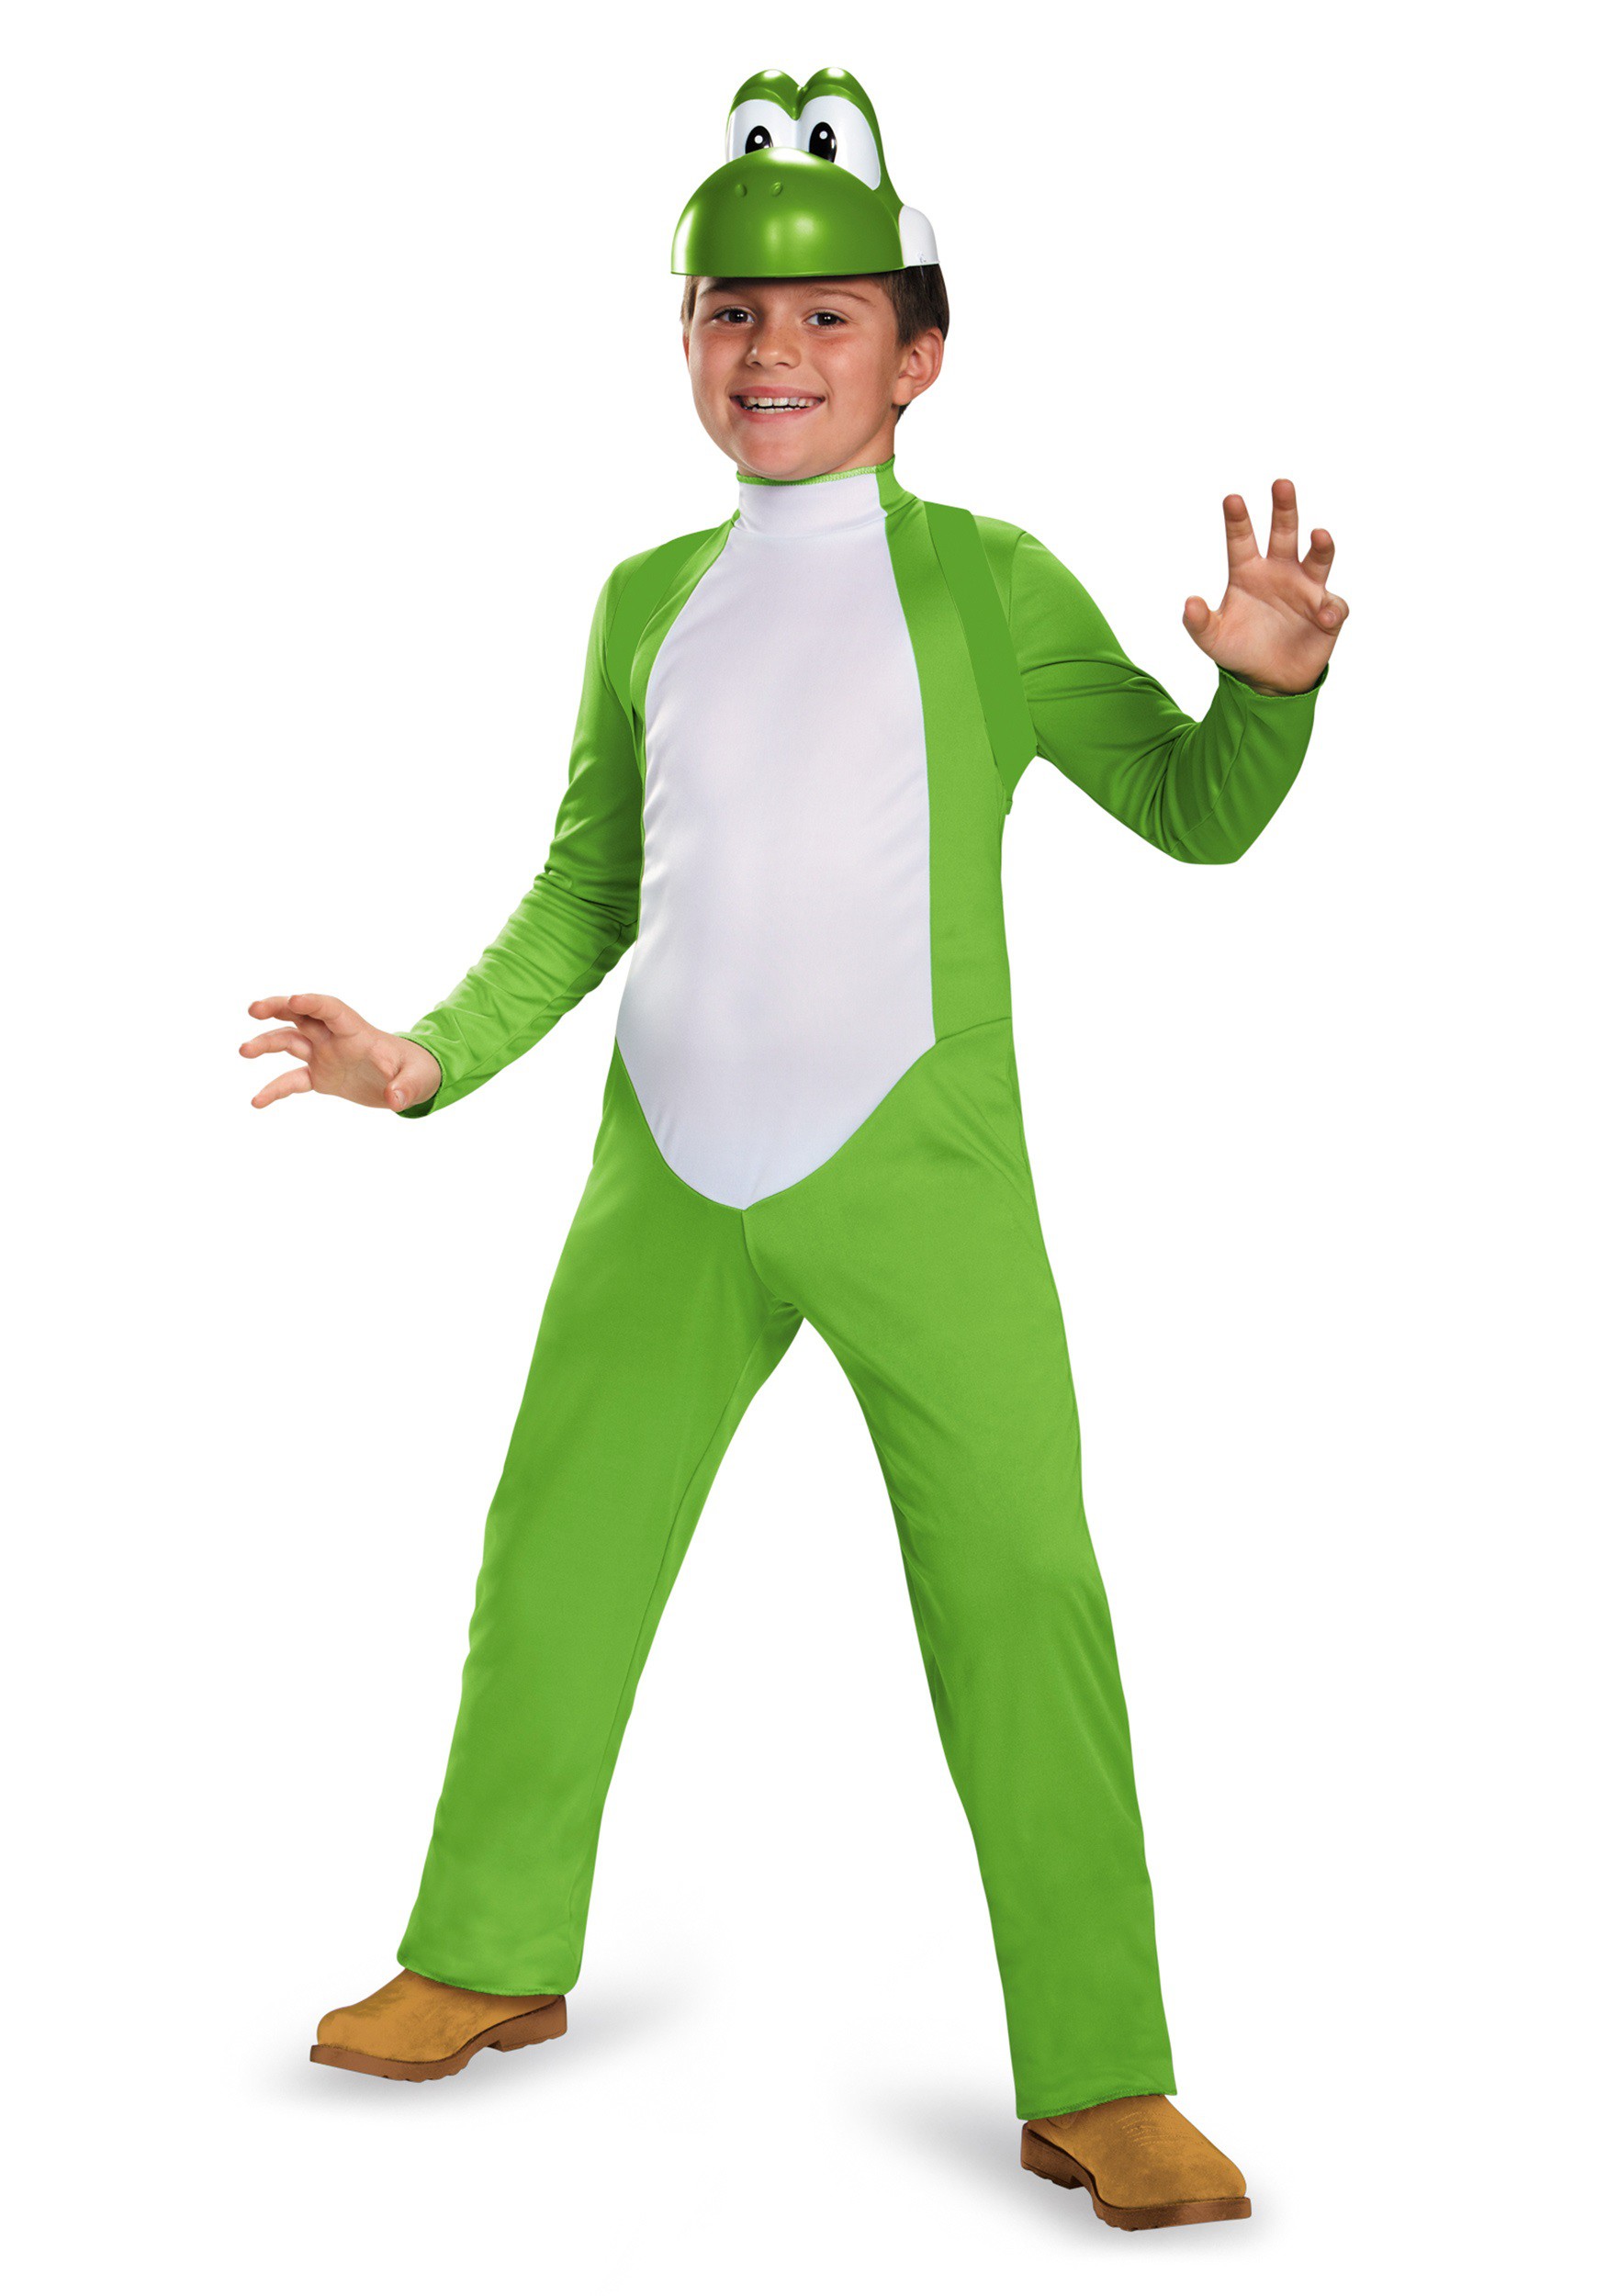 Photos - Fancy Dress Yoshi Disguise  Deluxe Costume for Boys Green/White DI85140 